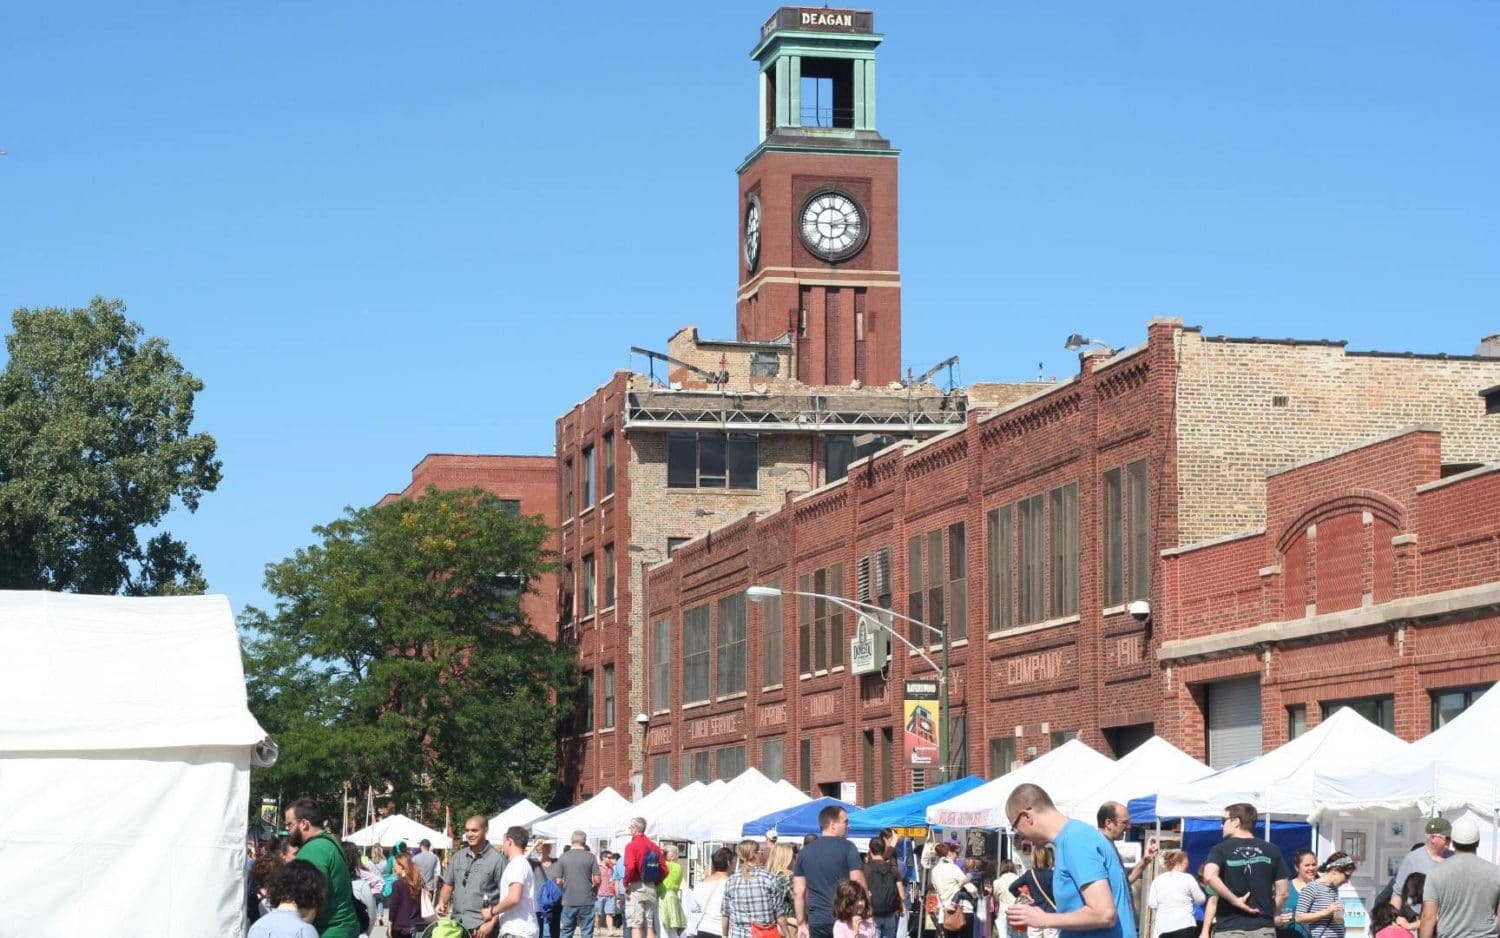 The outdoor arts market and street festival at Ravenswood ArtWalk